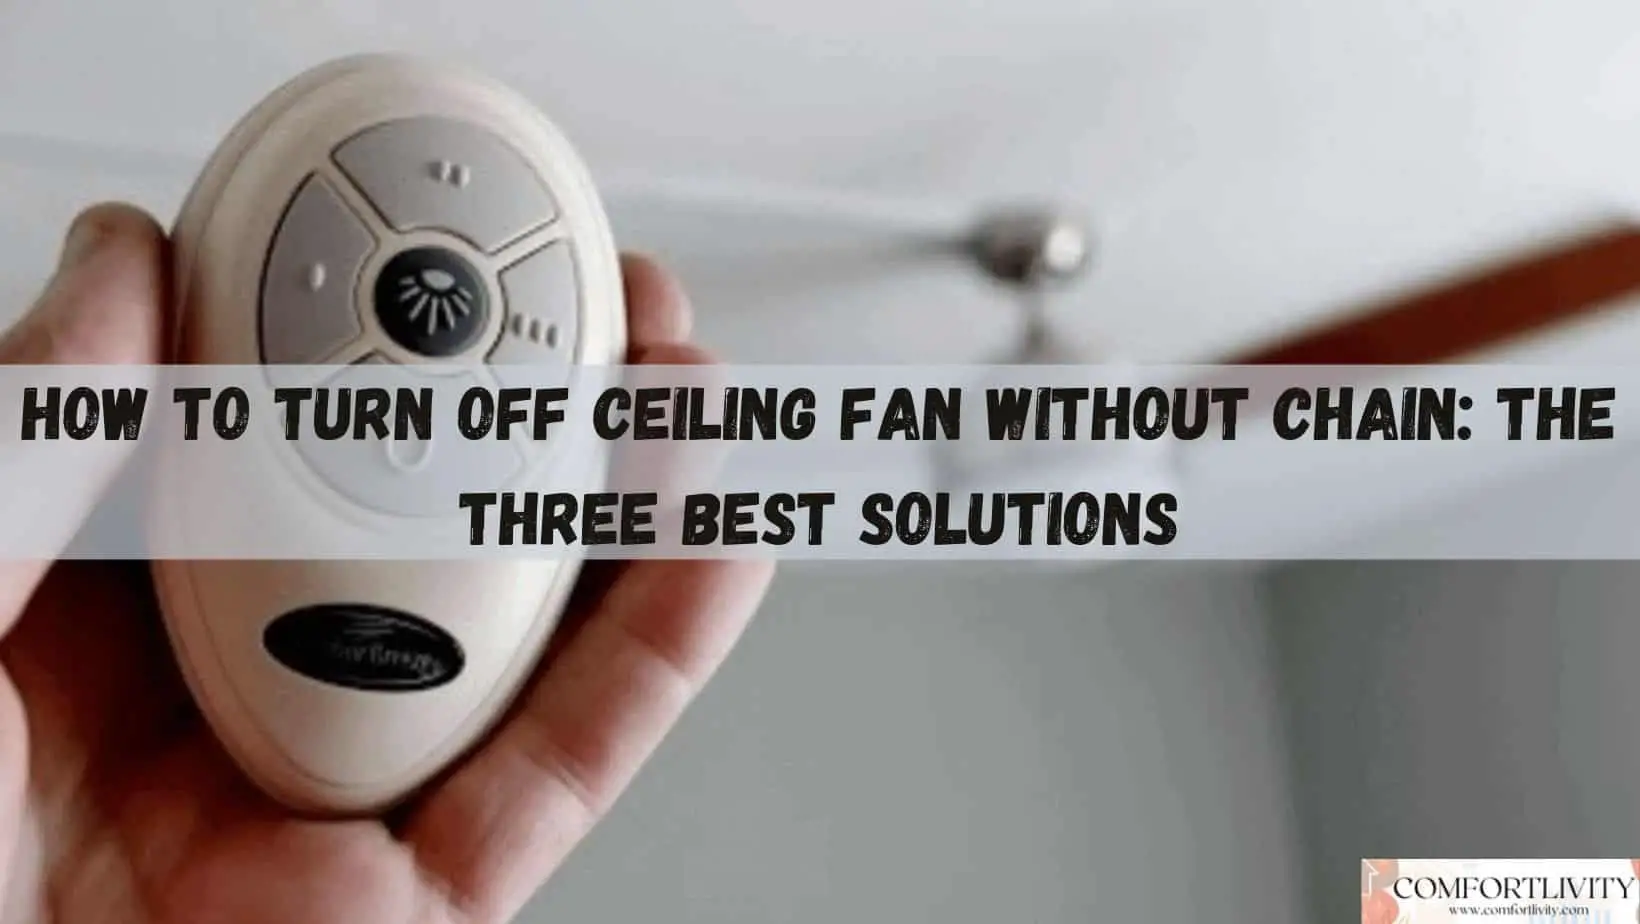 How To Turn Off Ceiling Fan Without Chain: The Three Best Solutions